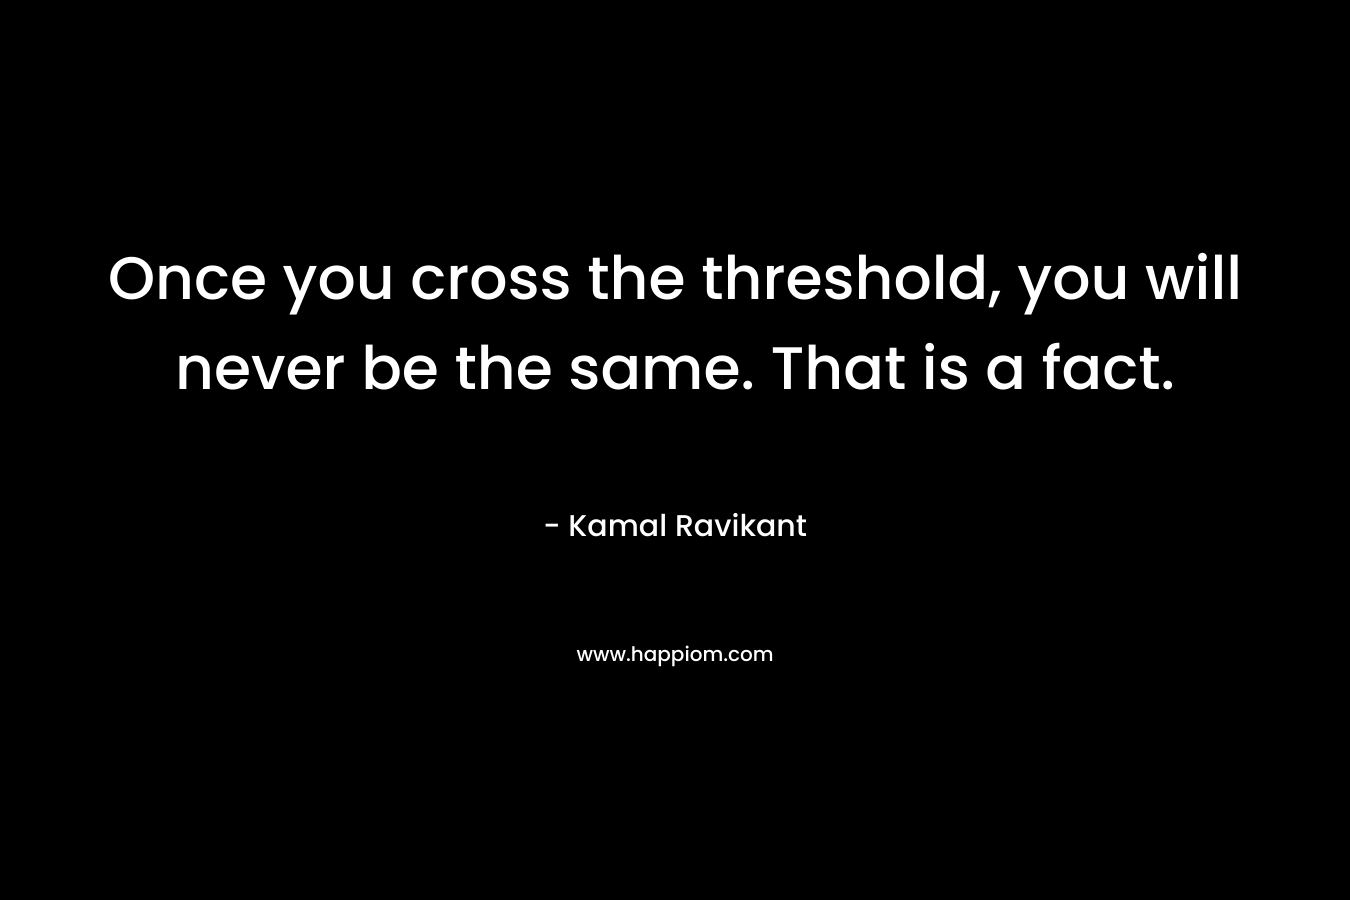 Once you cross the threshold, you will never be the same. That is a fact.